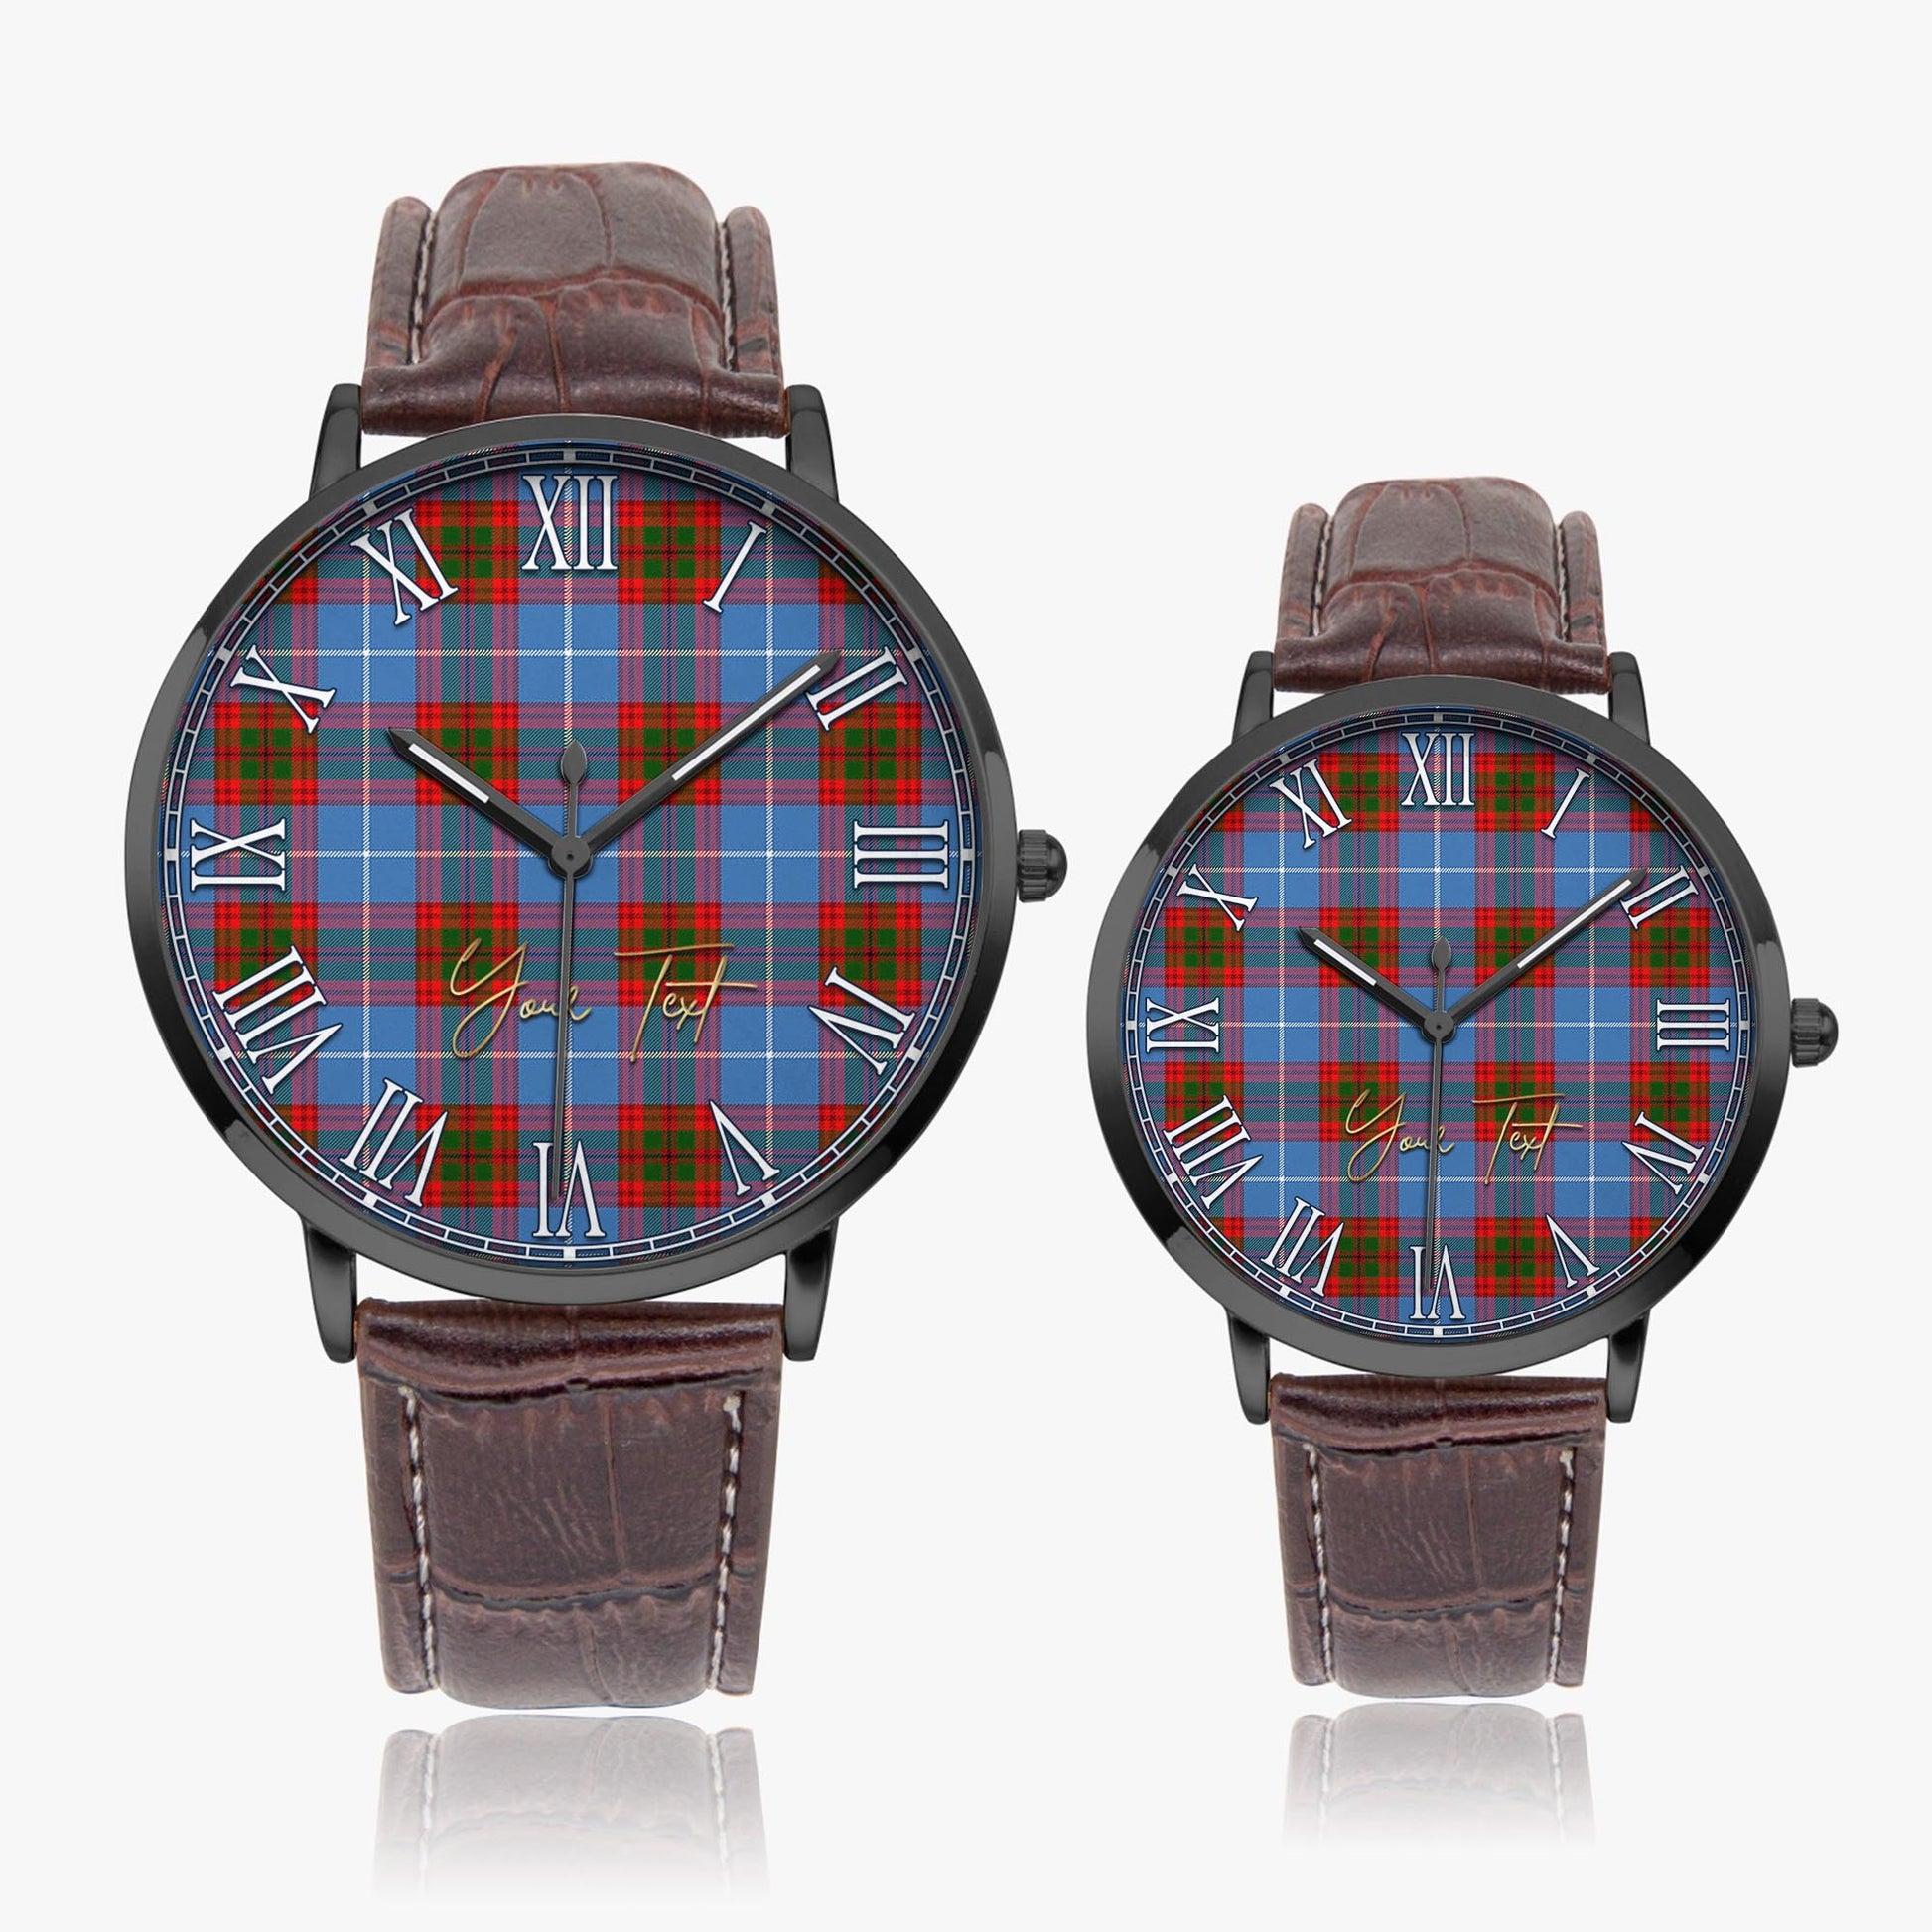 Pentland Tartan Personalized Your Text Leather Trap Quartz Watch Ultra Thin Black Case With Brown Leather Strap - Tartanvibesclothing